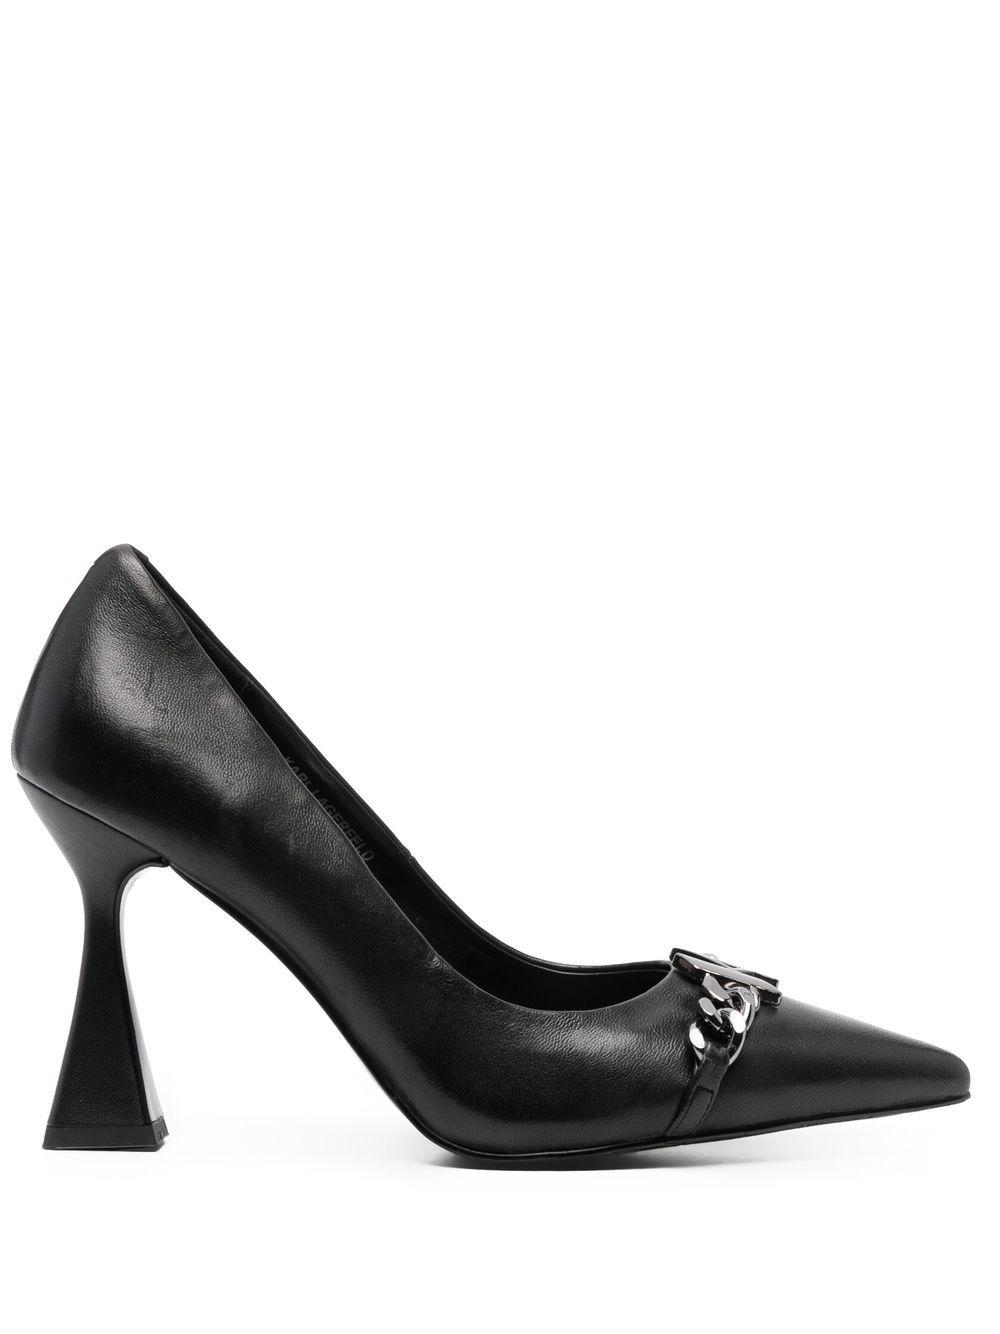 Karl Lagerfeld Leather Debut Chain Court Pumps in Black | Lyst UK